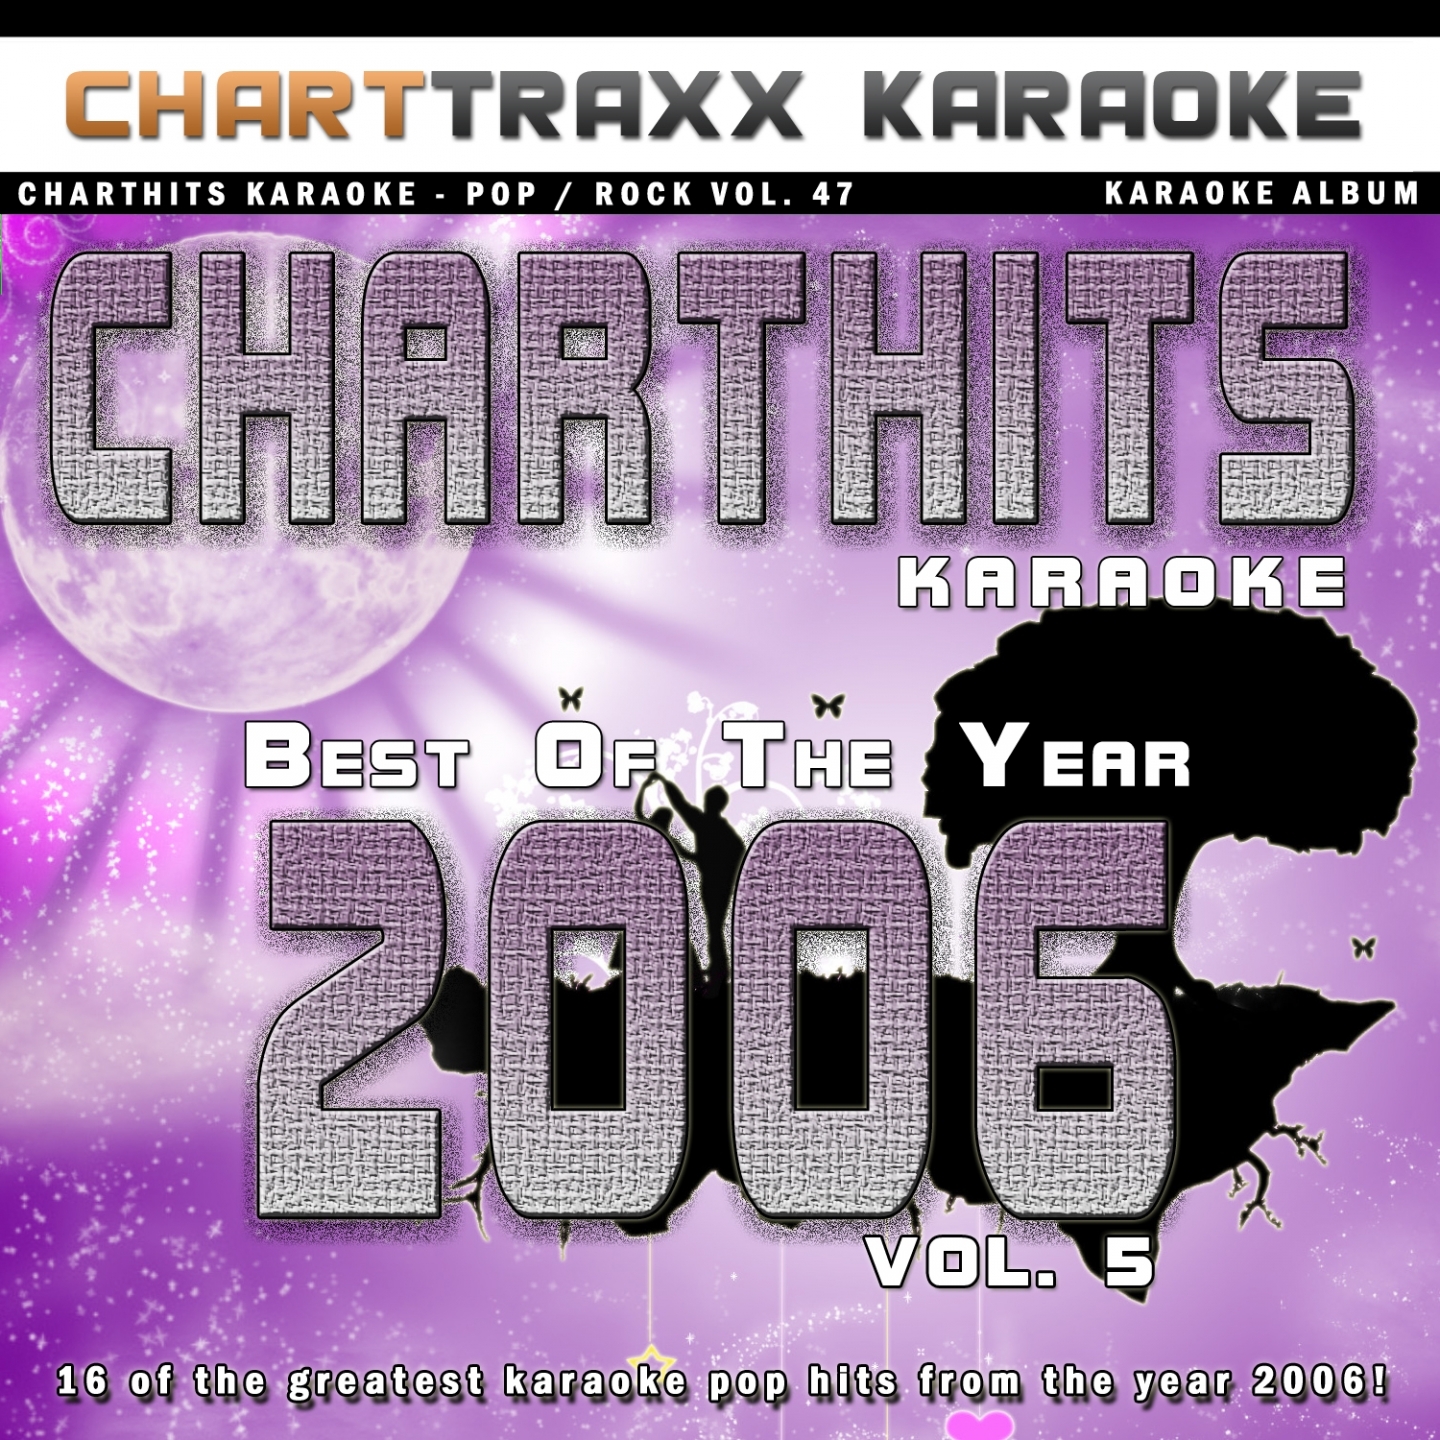 Charthits Karaoke : The Very Best of the Year 2006, Vol. 5